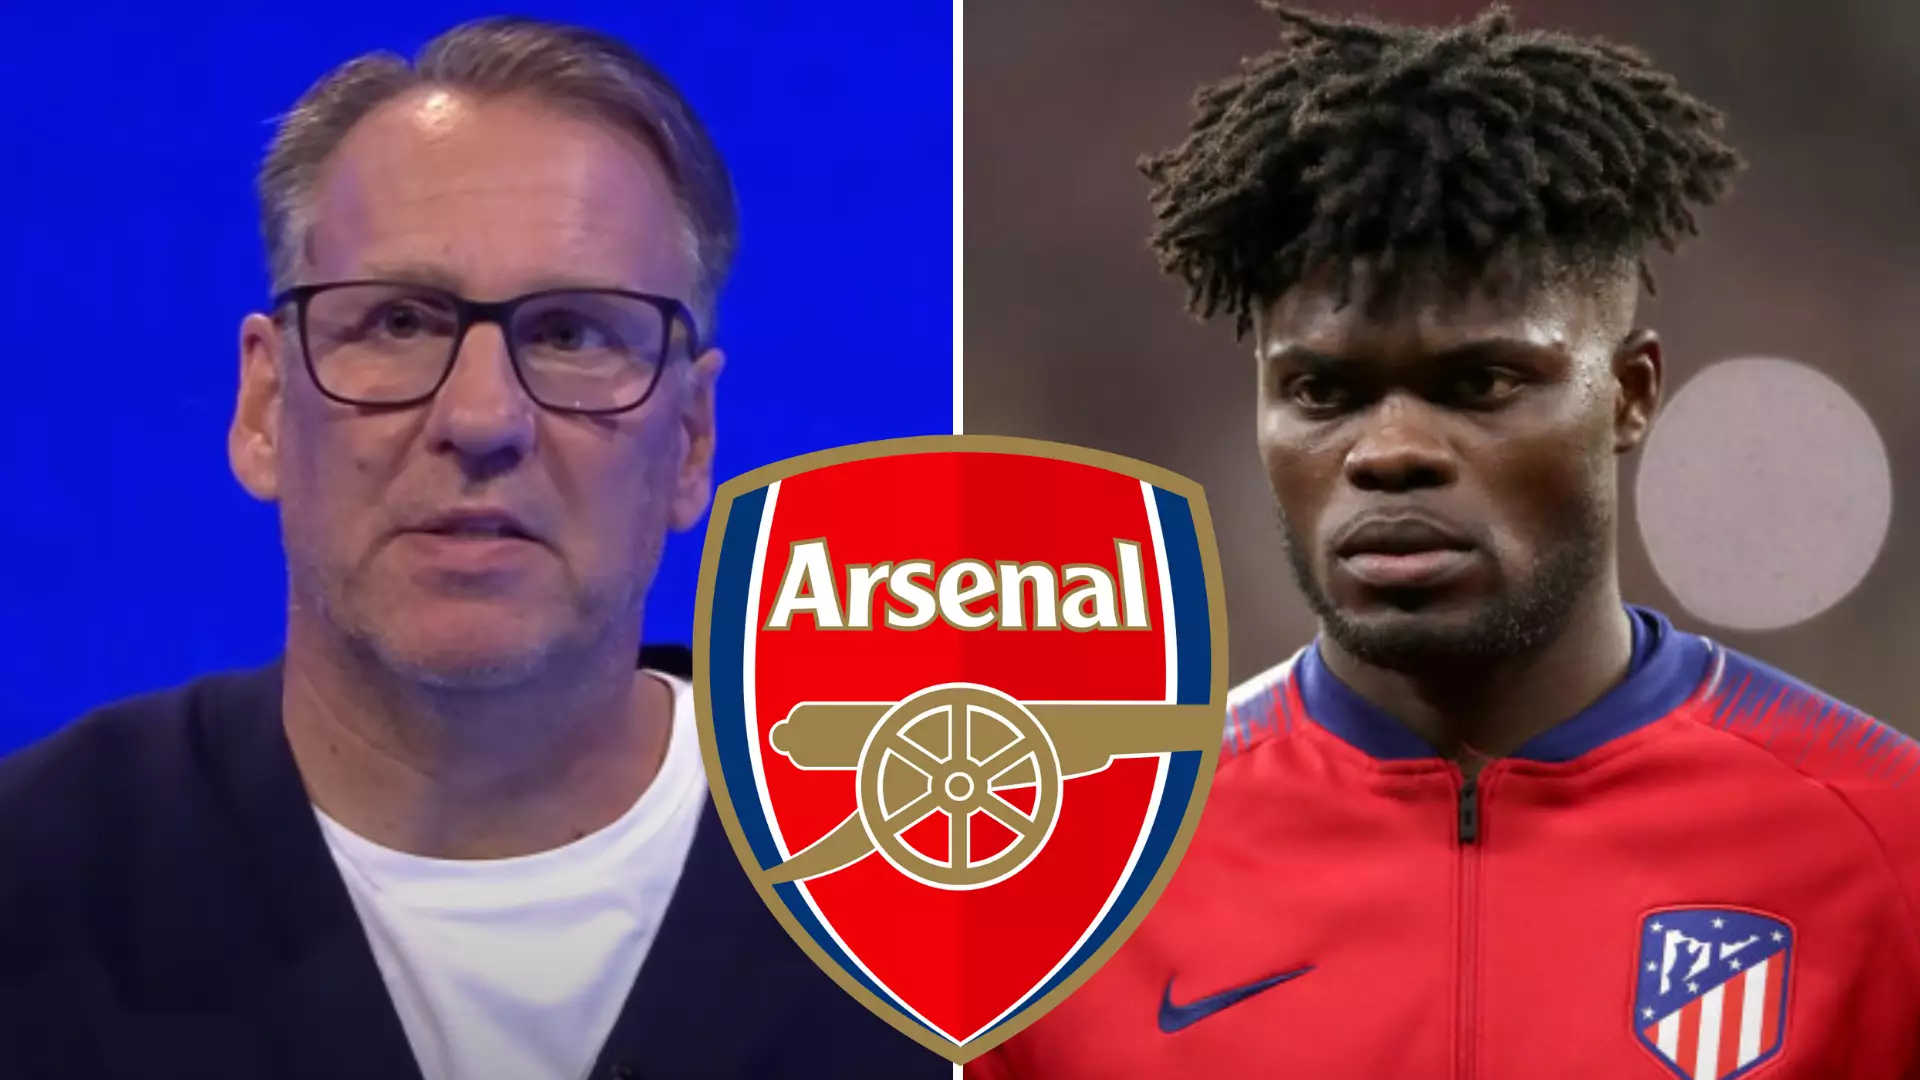 Paul Merson’s Reaction When He Learned How Much Arsenal Will Pay For Thomas Partey